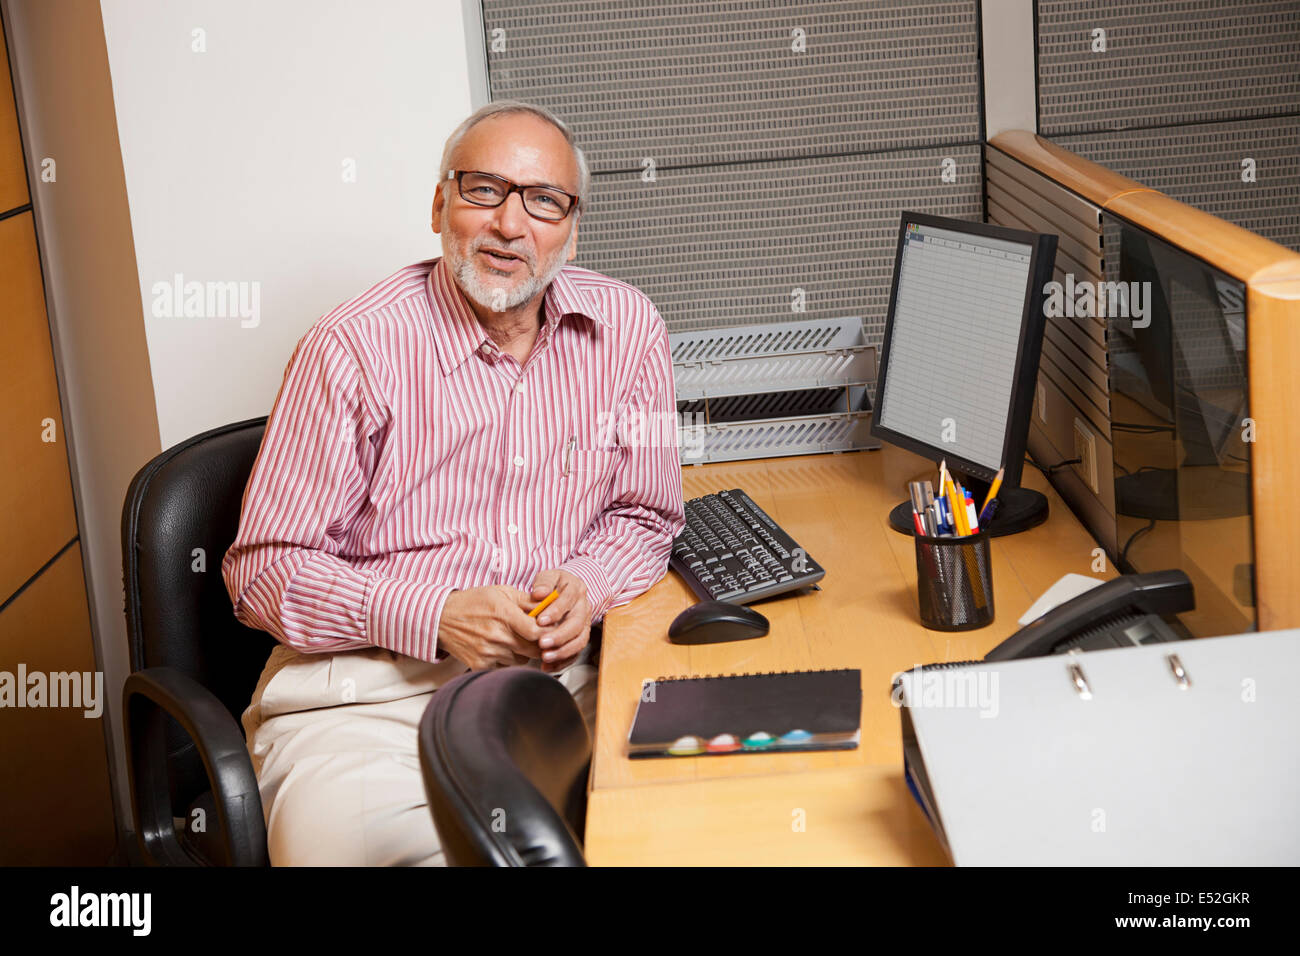 Portrait of a senior business executive sitting at his work station Stock Photo